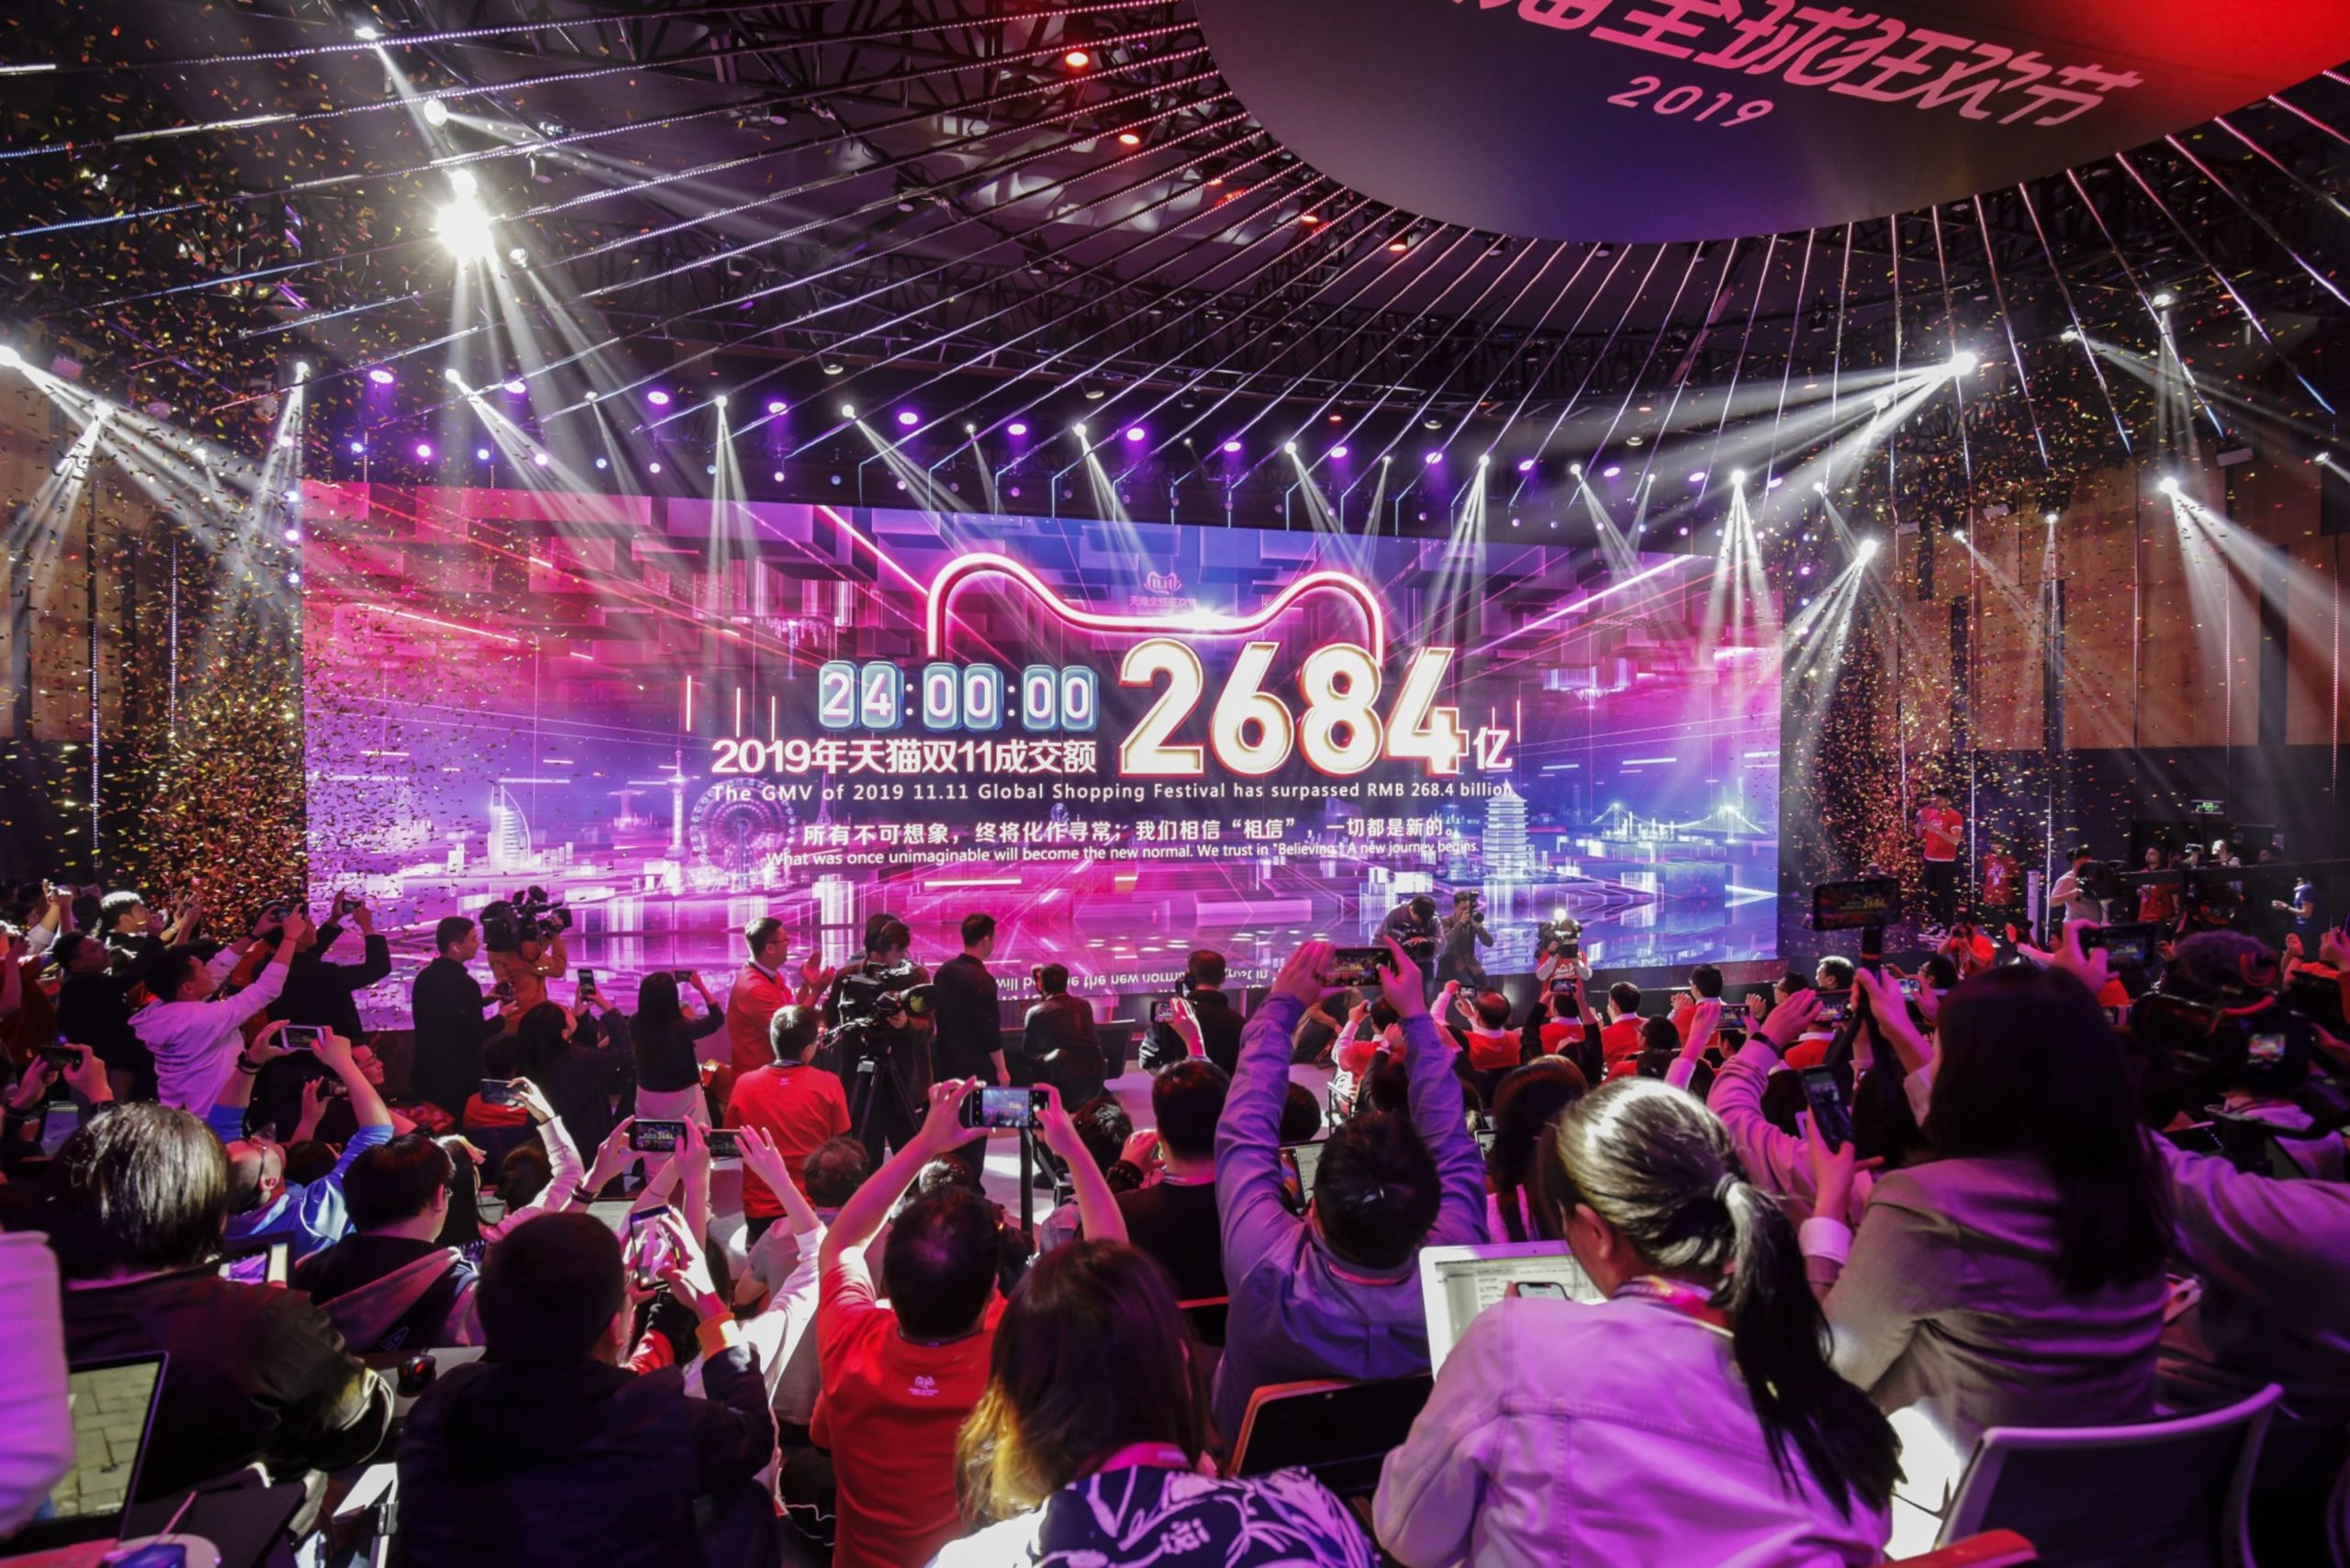 Members of the media and guests take photos with their phones at a screen showing the Gross merchandise value traded on various Alibaba platforms during the 11.11 shopping festival in Hangzhou, China on Monday 11 November 2019.